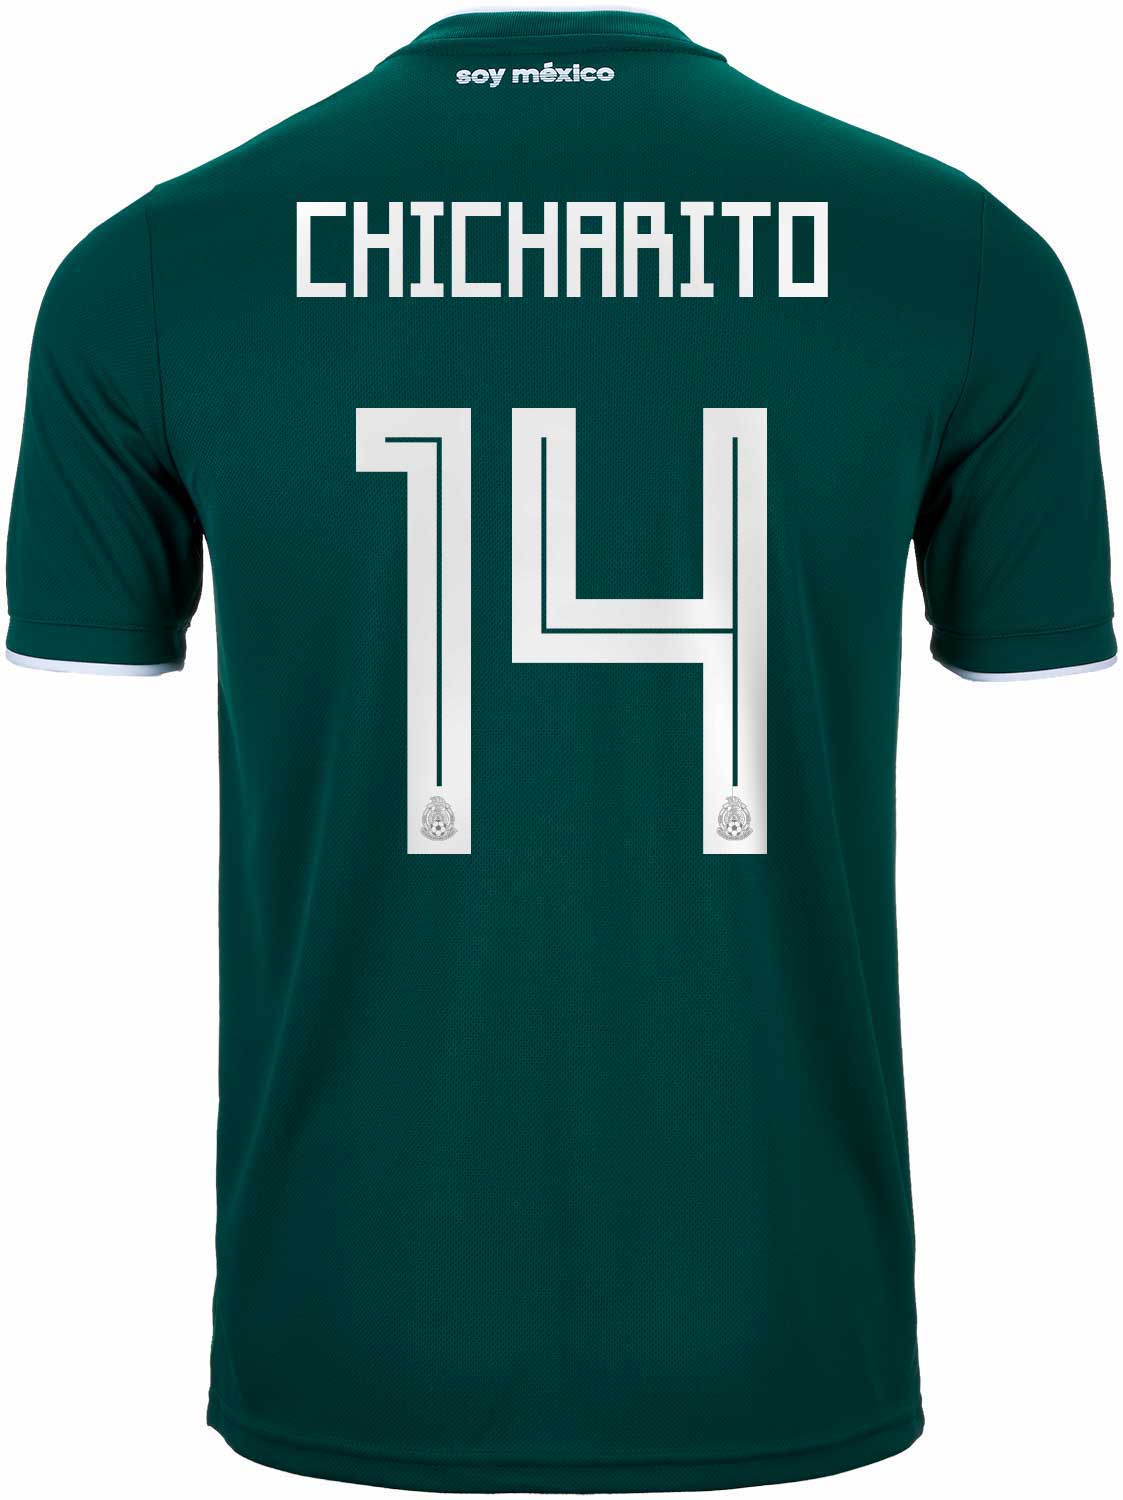 7-8 YEARS Set 2018 Home Youth S Mexico Green CHICHARITO #14 Youth New!! 